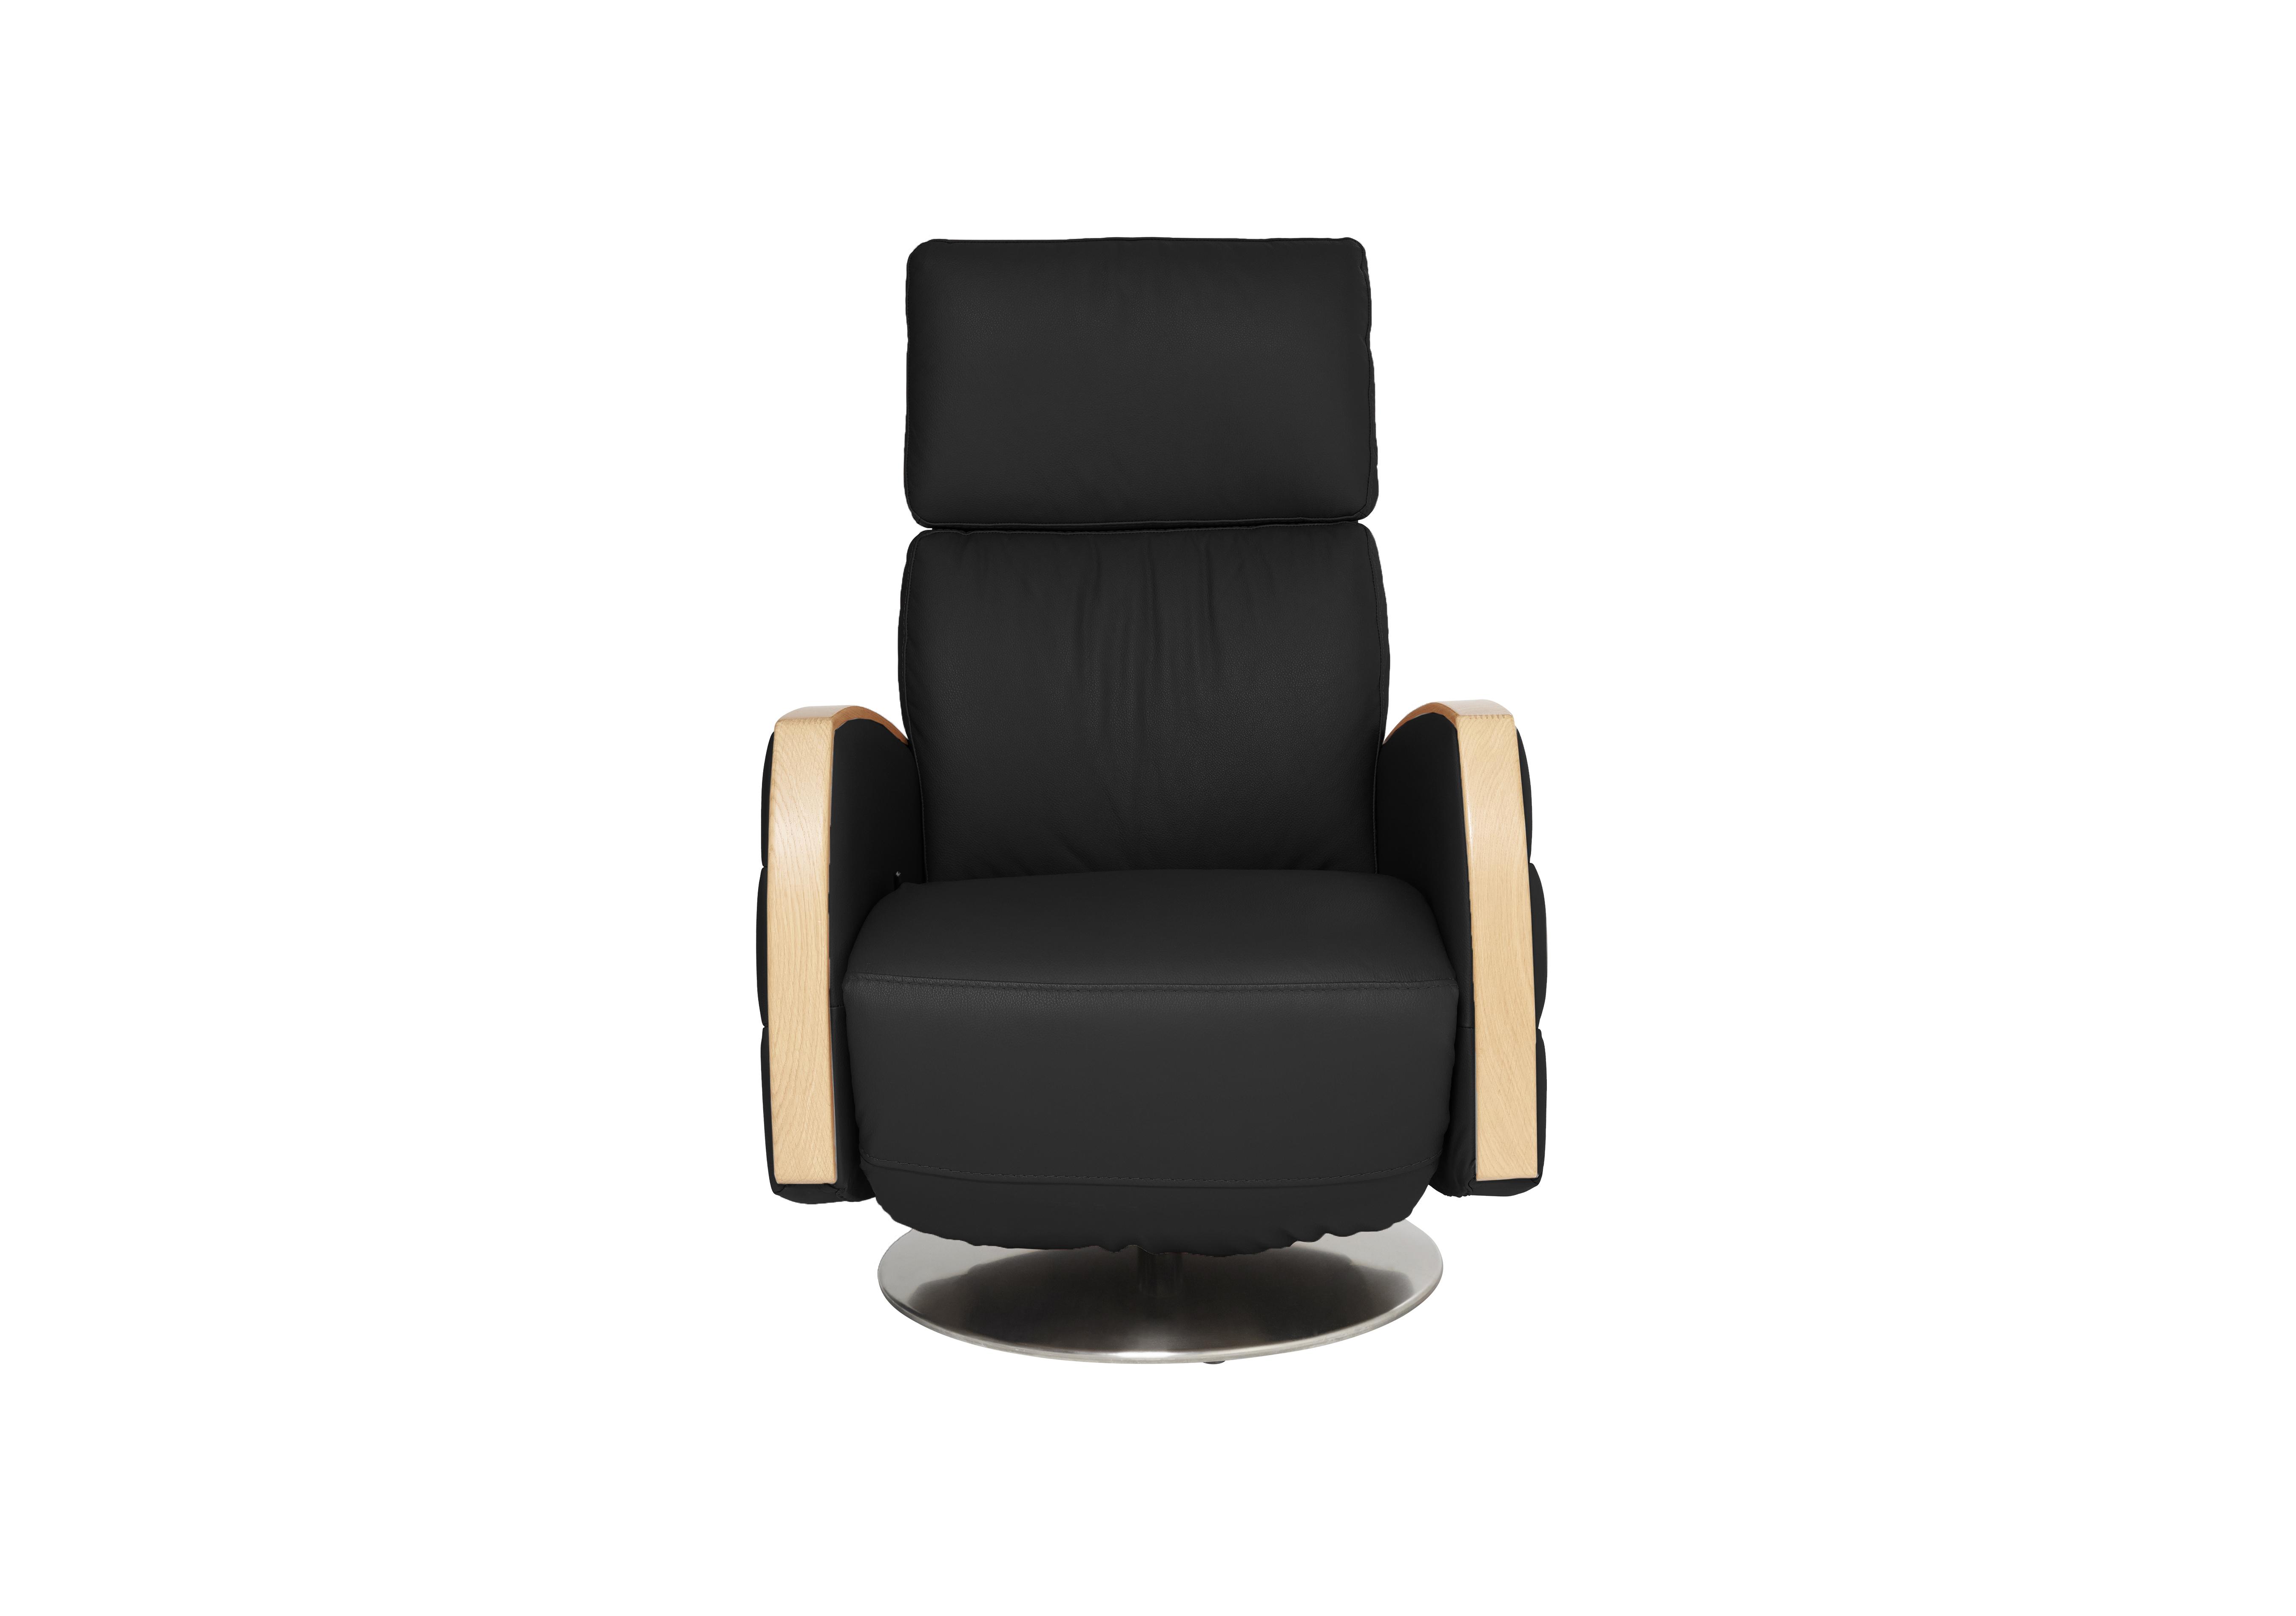 Noto Leather Recliner Chair in L900 Black on Furniture Village